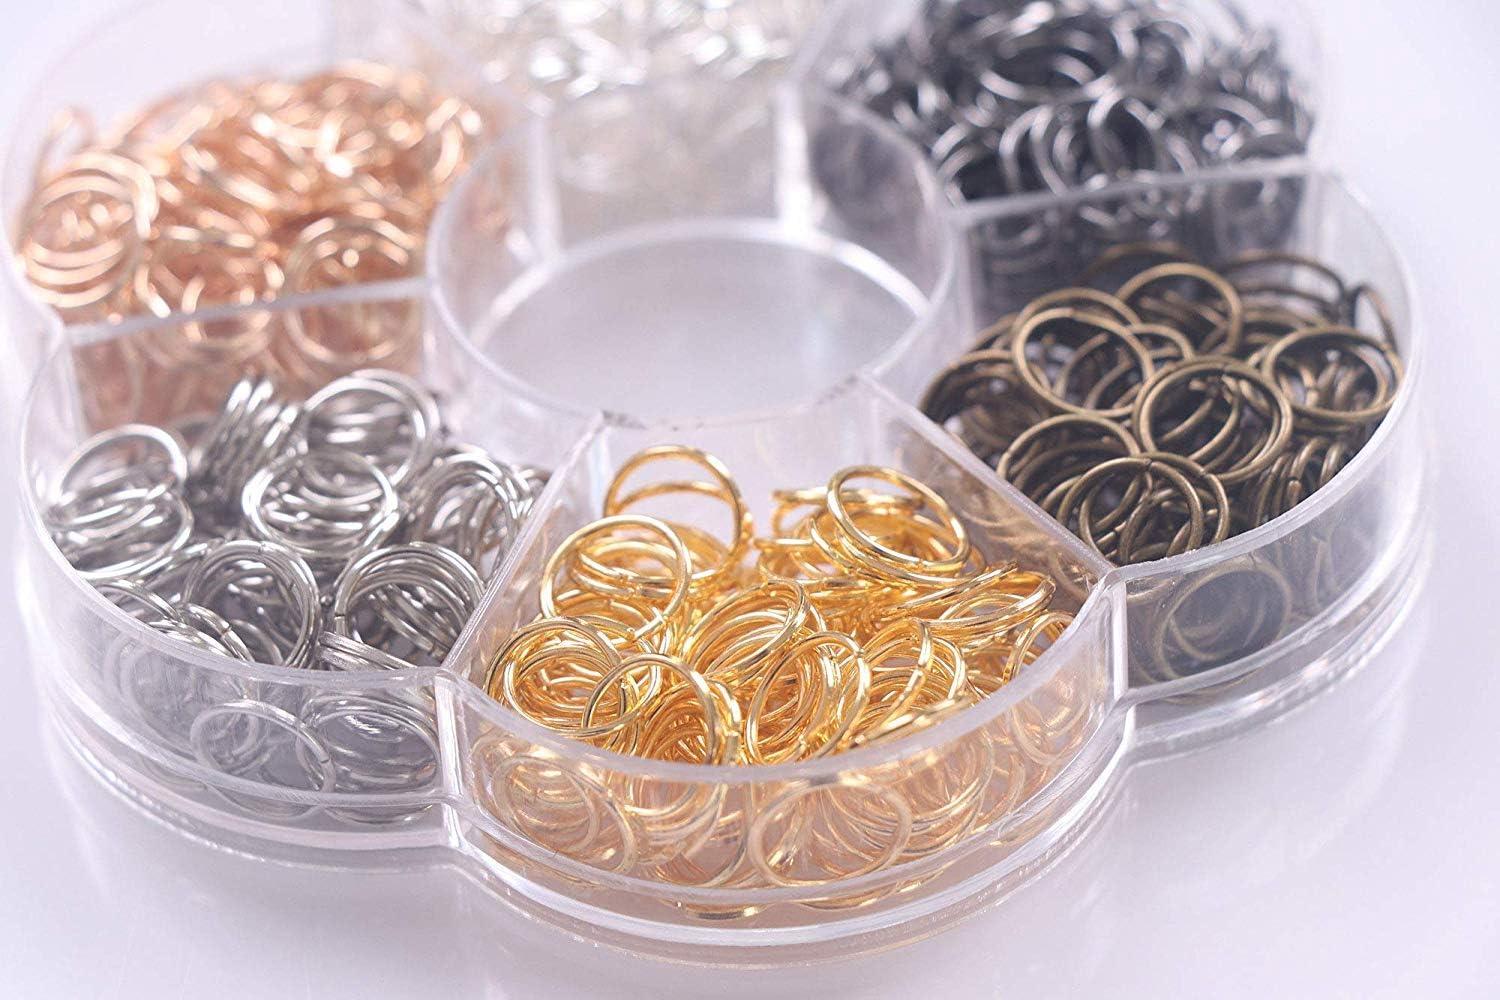 1500Pcs Mixed 6 Sizes Open Jump Rings,4mm 5mm 6mm 7mm 8mm 10mm Jump Ring  Jewelry Keychain for Jewelry Making Accessories with 1Pcs Jump Ring